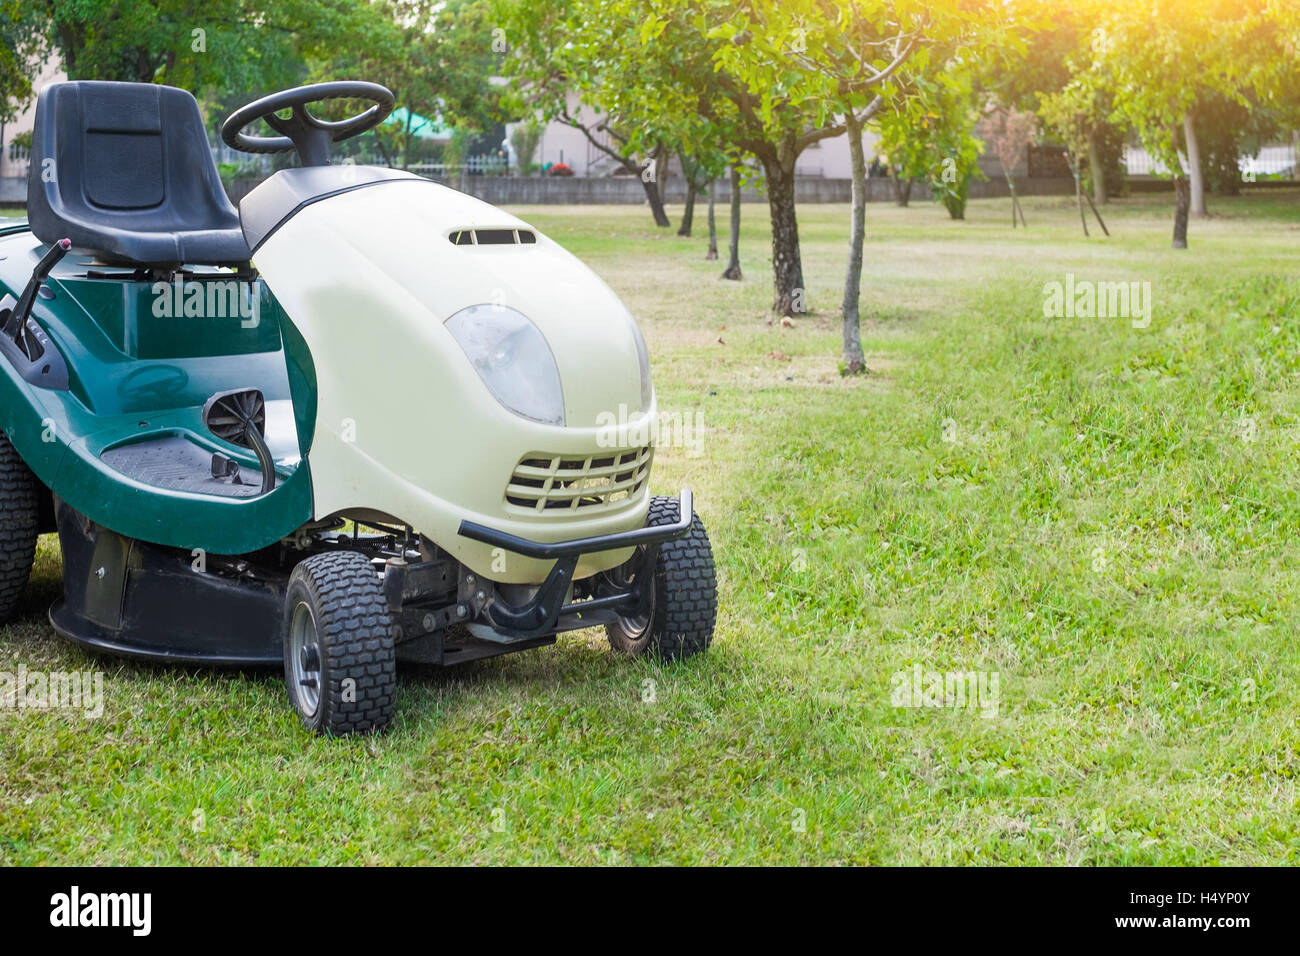 Lawn mower parked in a garden Stock Photo